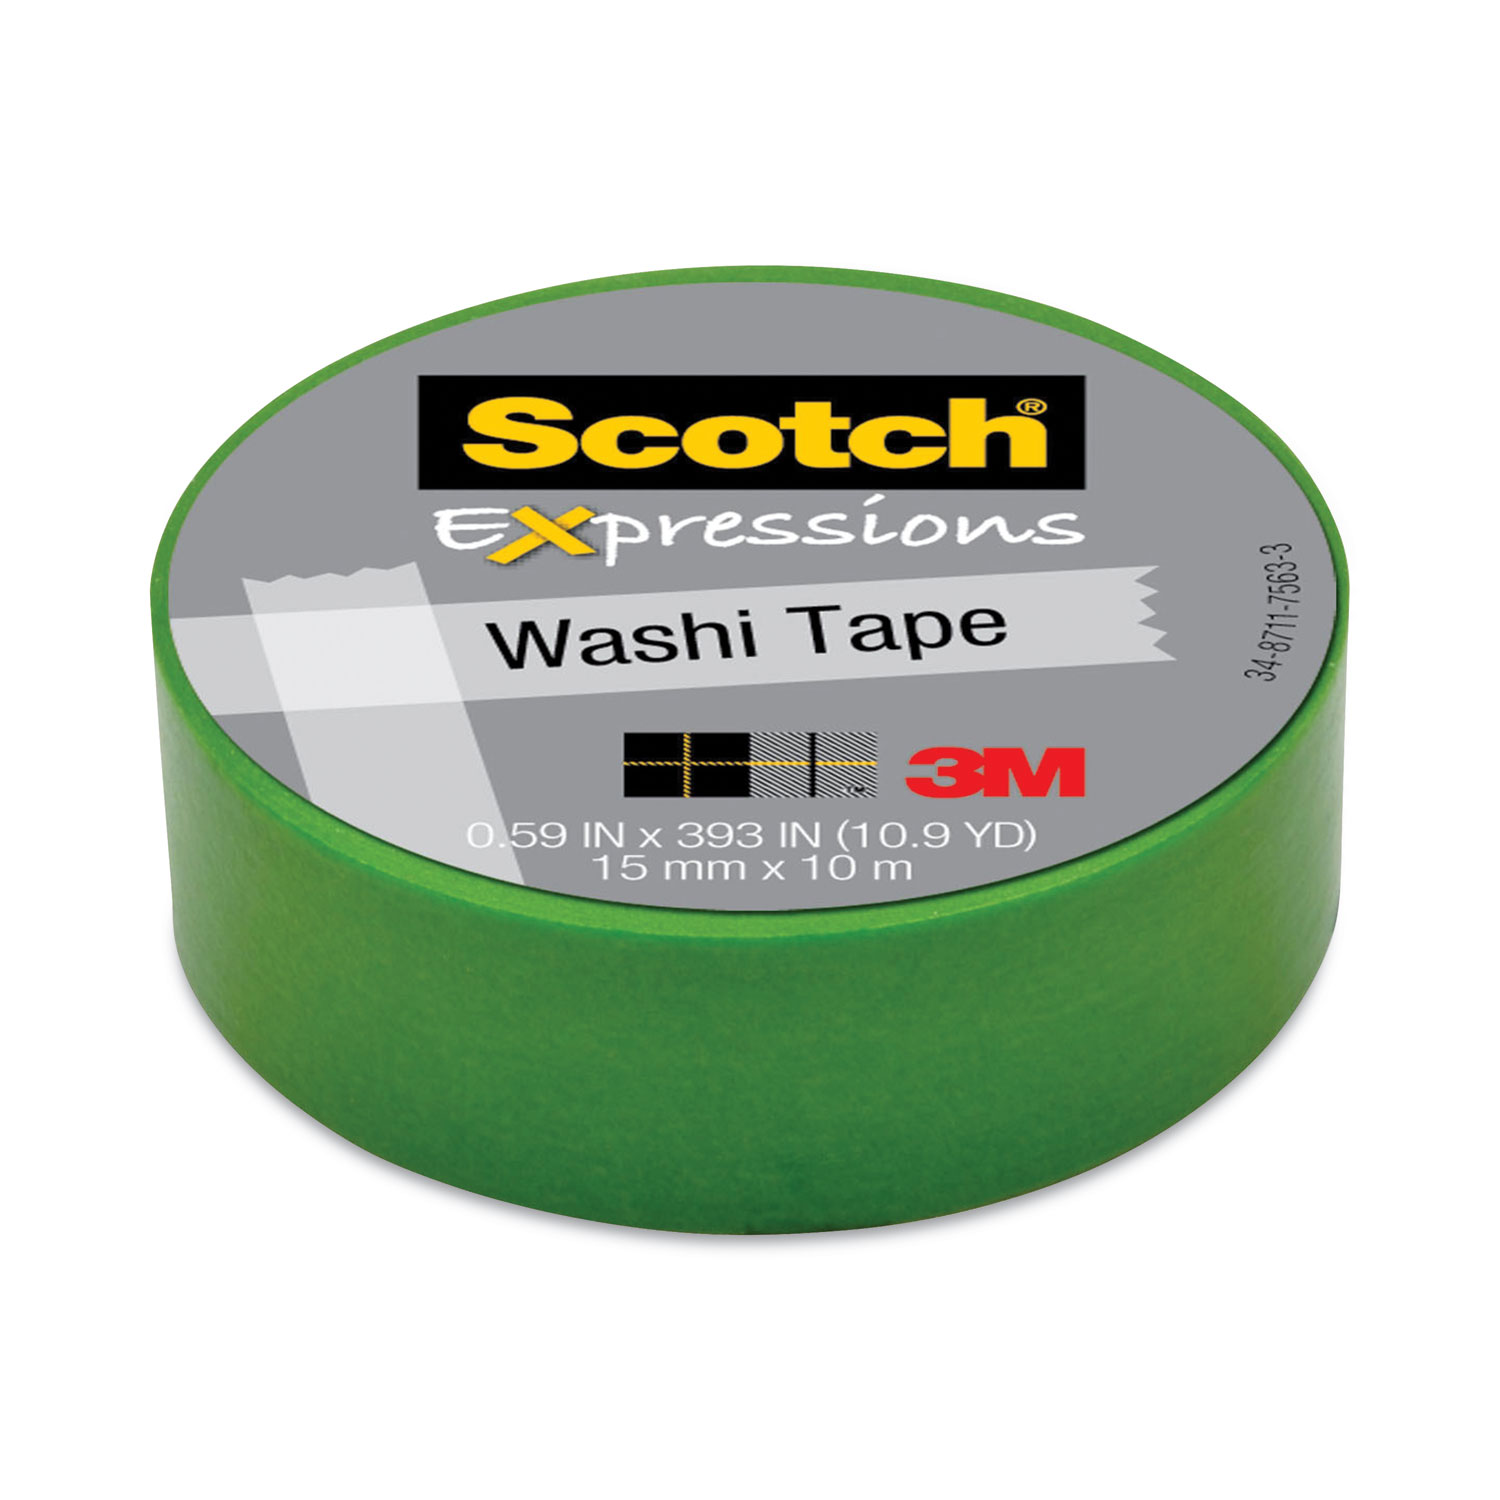 Scotch Expressions Masking Tape, .94 x 20 yds, Primary Green by Scotch 